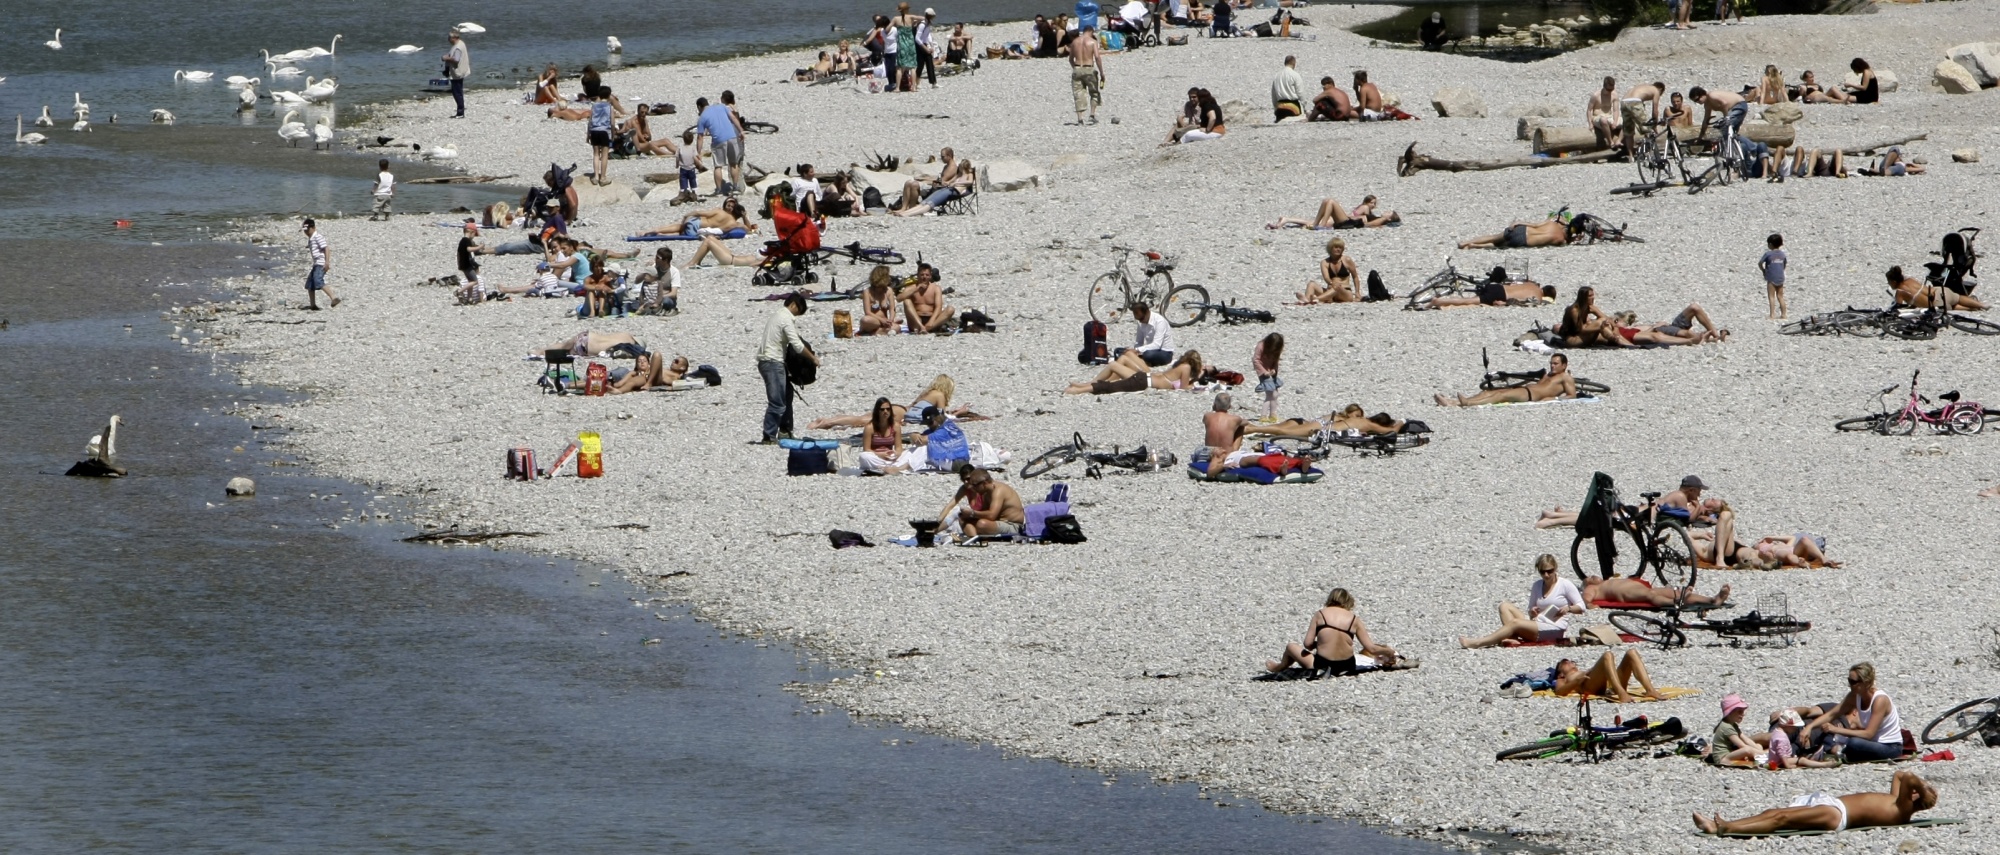 Walk In The Nude Beach Ass - Why Munich Went Ahead and Set Up 6 Official 'Urban Naked Zones' - Bloomberg